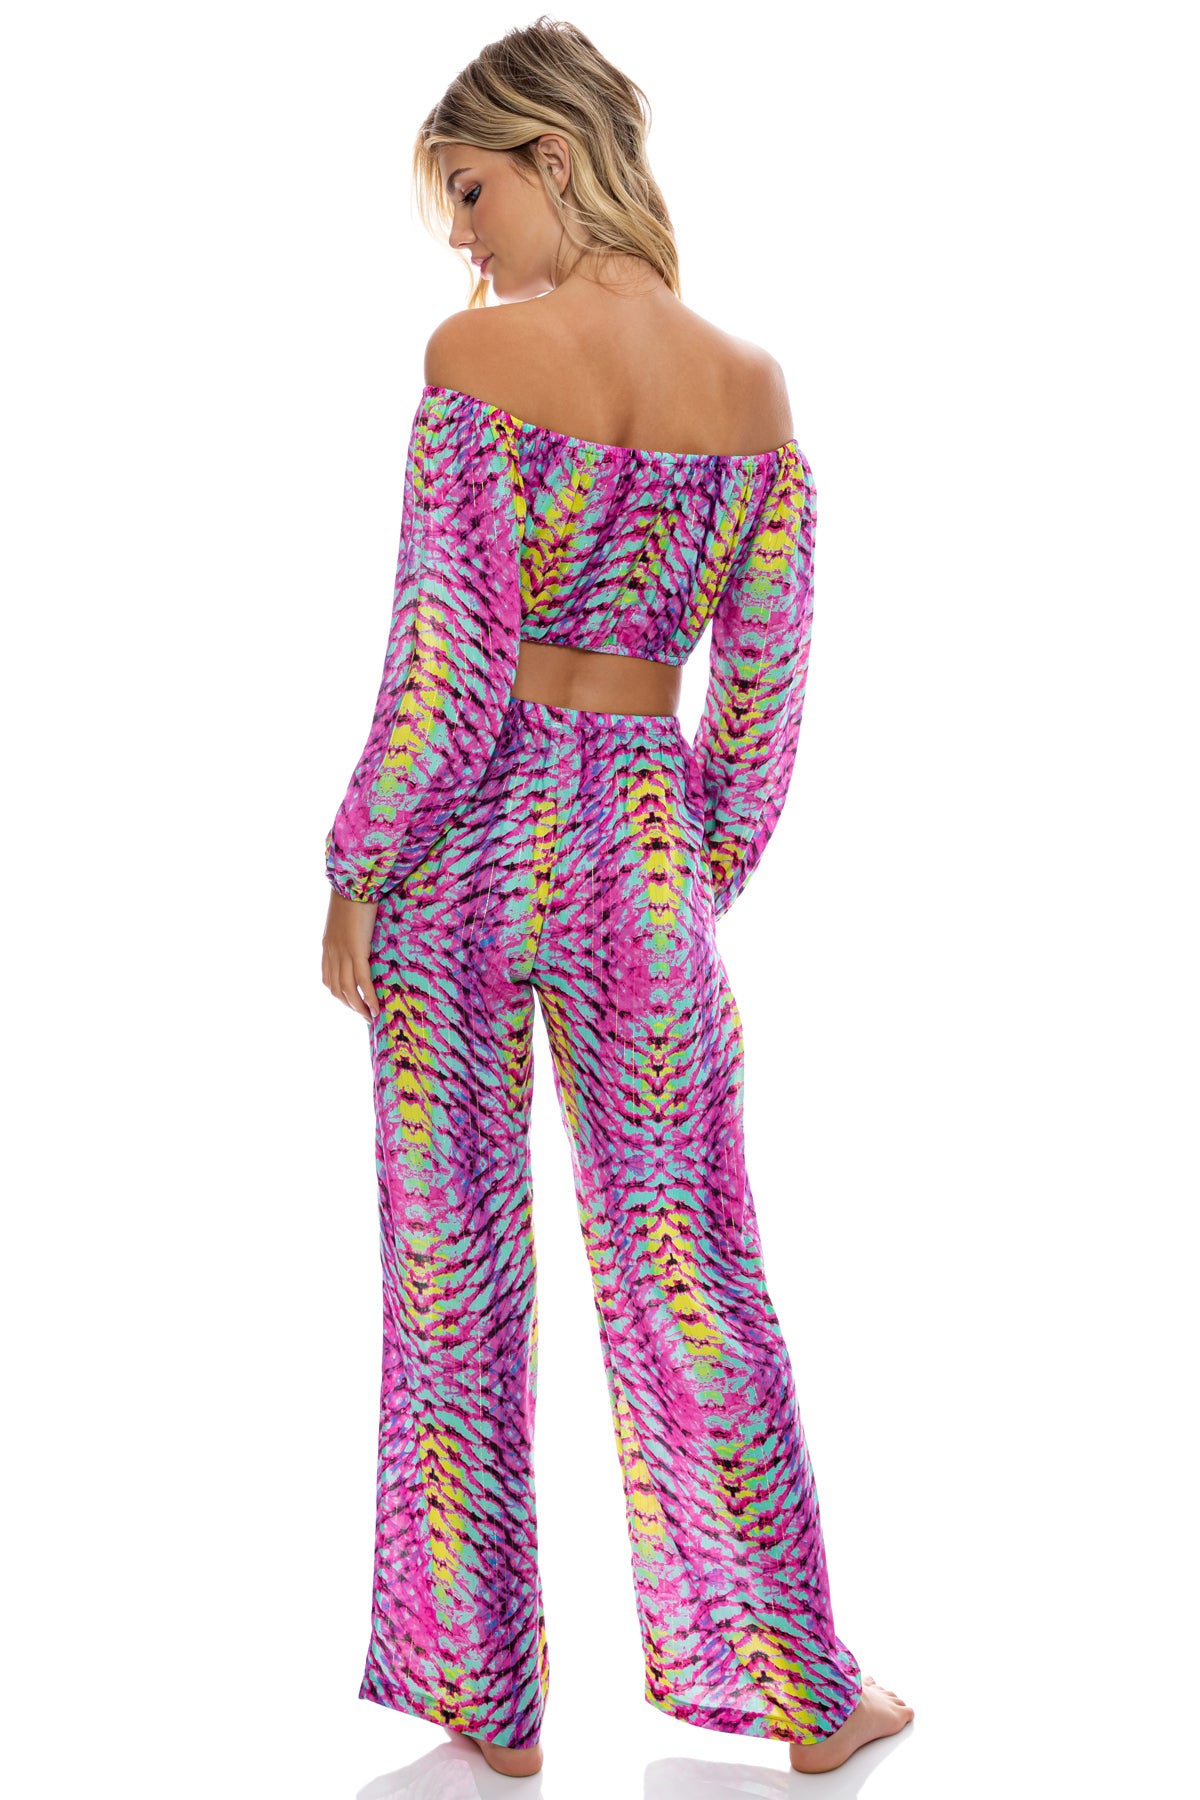 OASIS BABE - Crop Top & Relaxed Fit Pants • Multicolor – Luli Fama